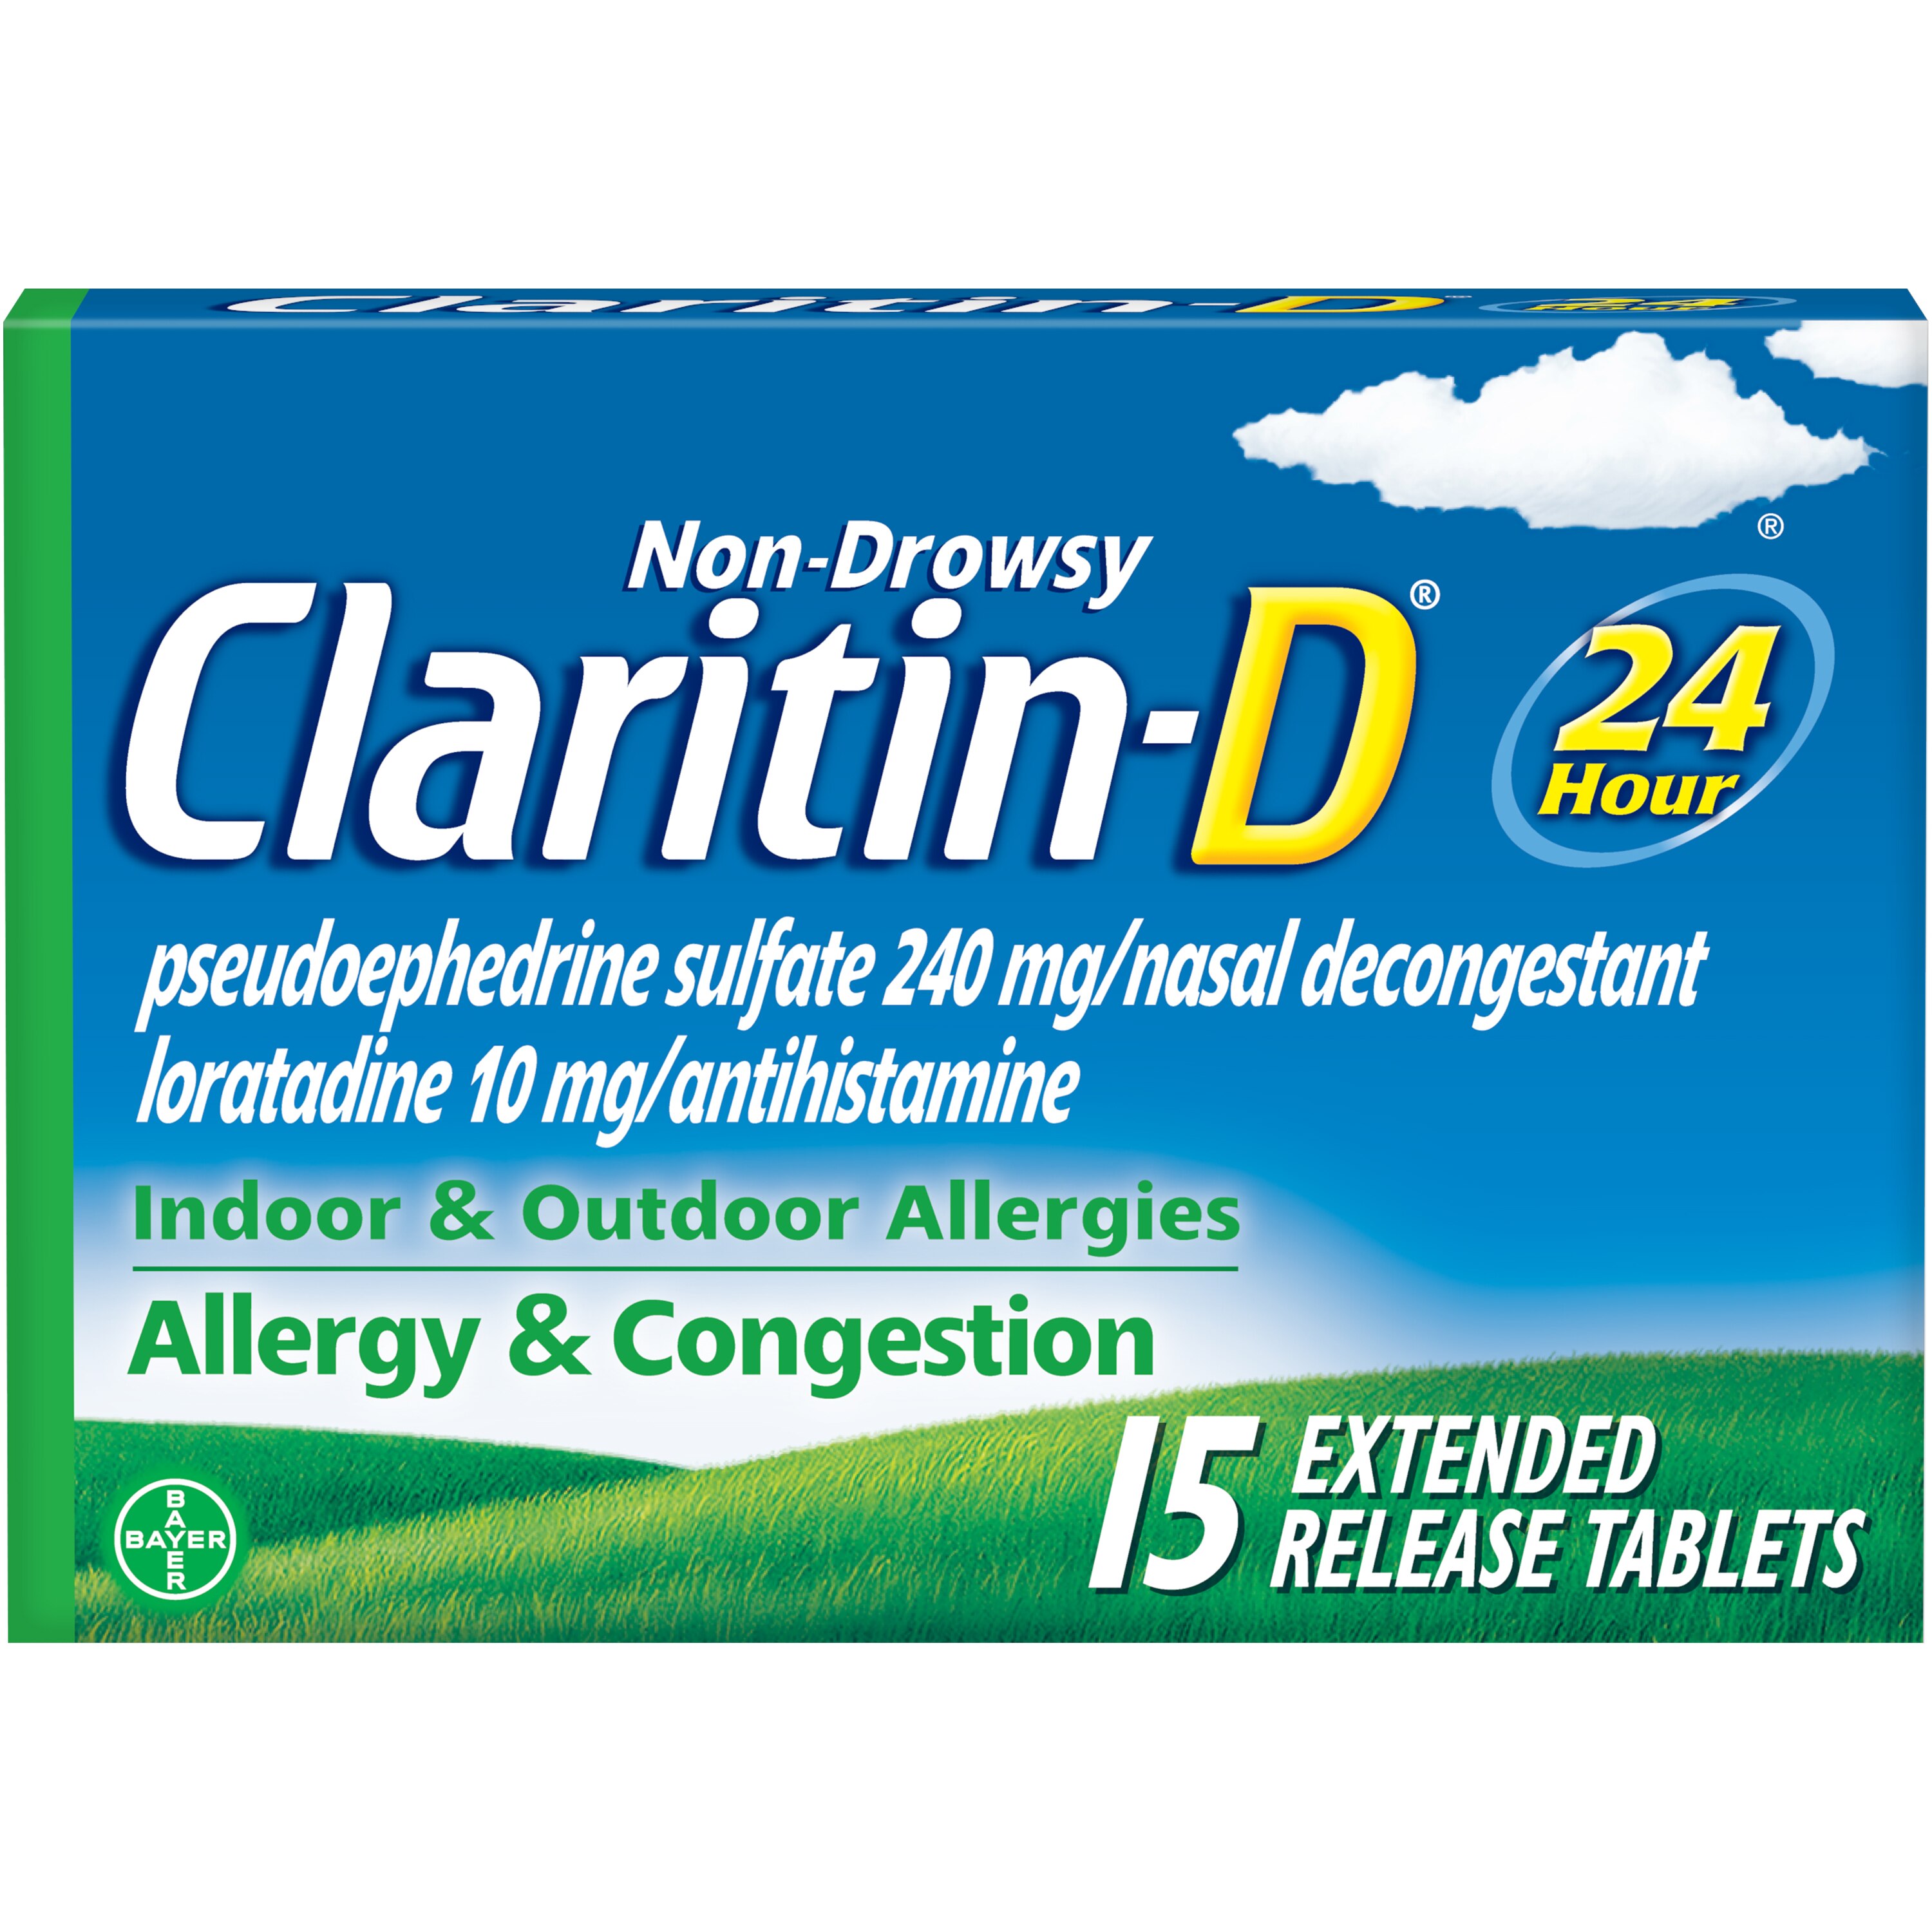 Claritin-D 24 Hour Non-Drowsy Allergy Medicine, Powerful Relief, Nasal Congestion & Sinus Pressure Relief, Indoor And Outdoor Allergy Relief, 15 Ct